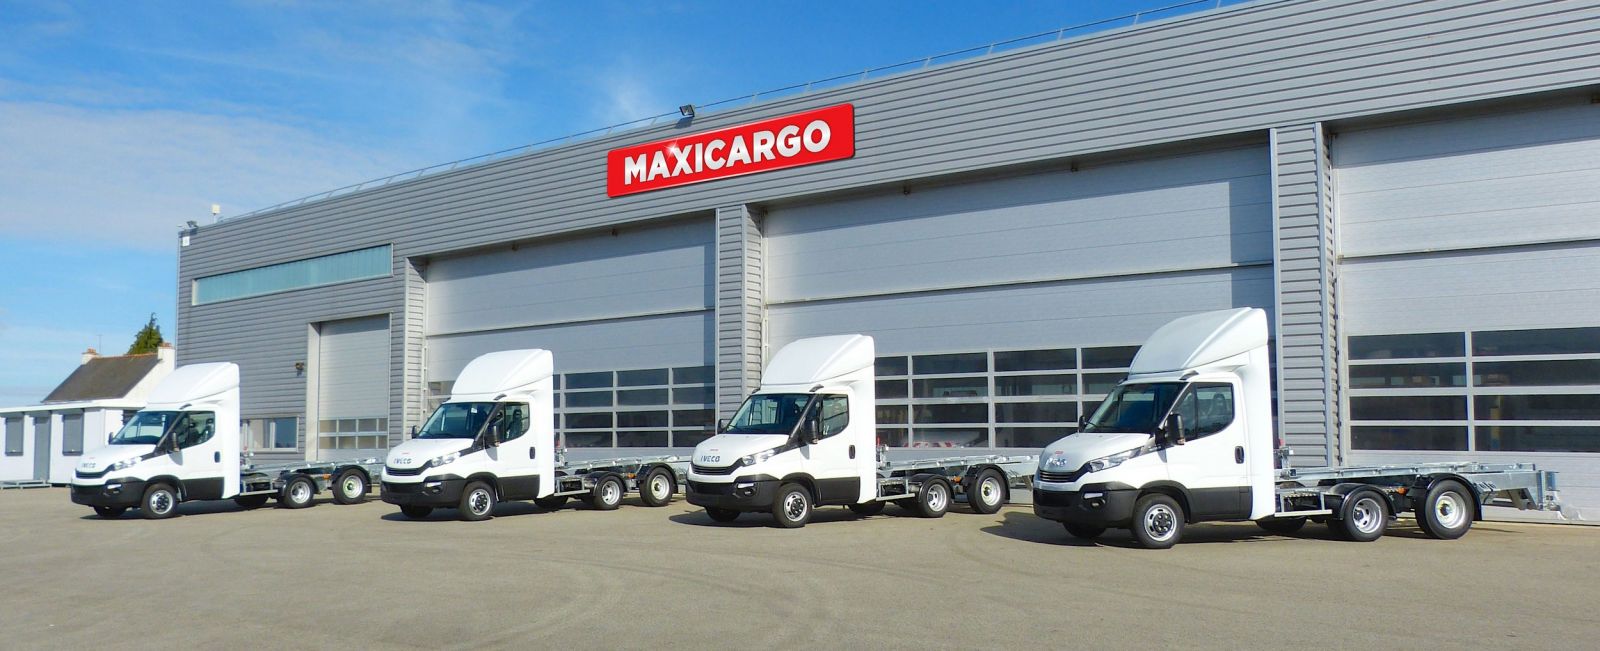 Maxicargo trailer chassis